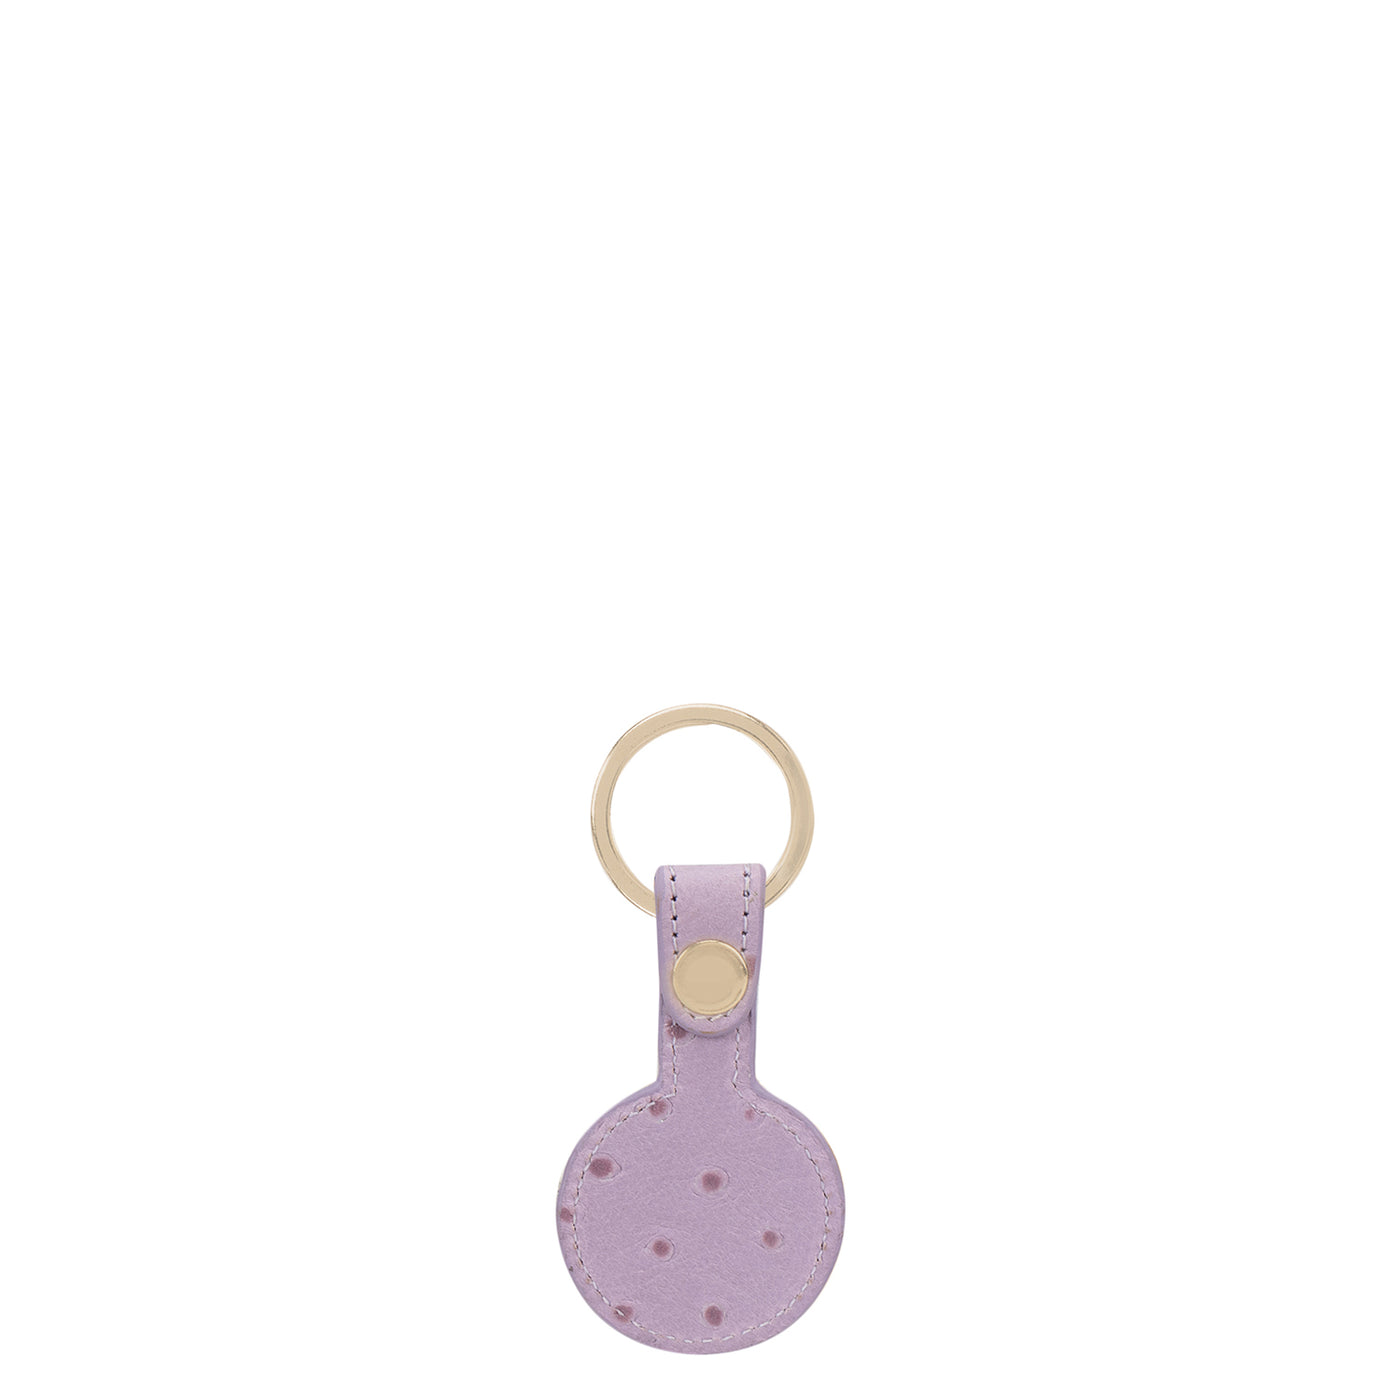 Ostrich Leather Key Chain - Lavender